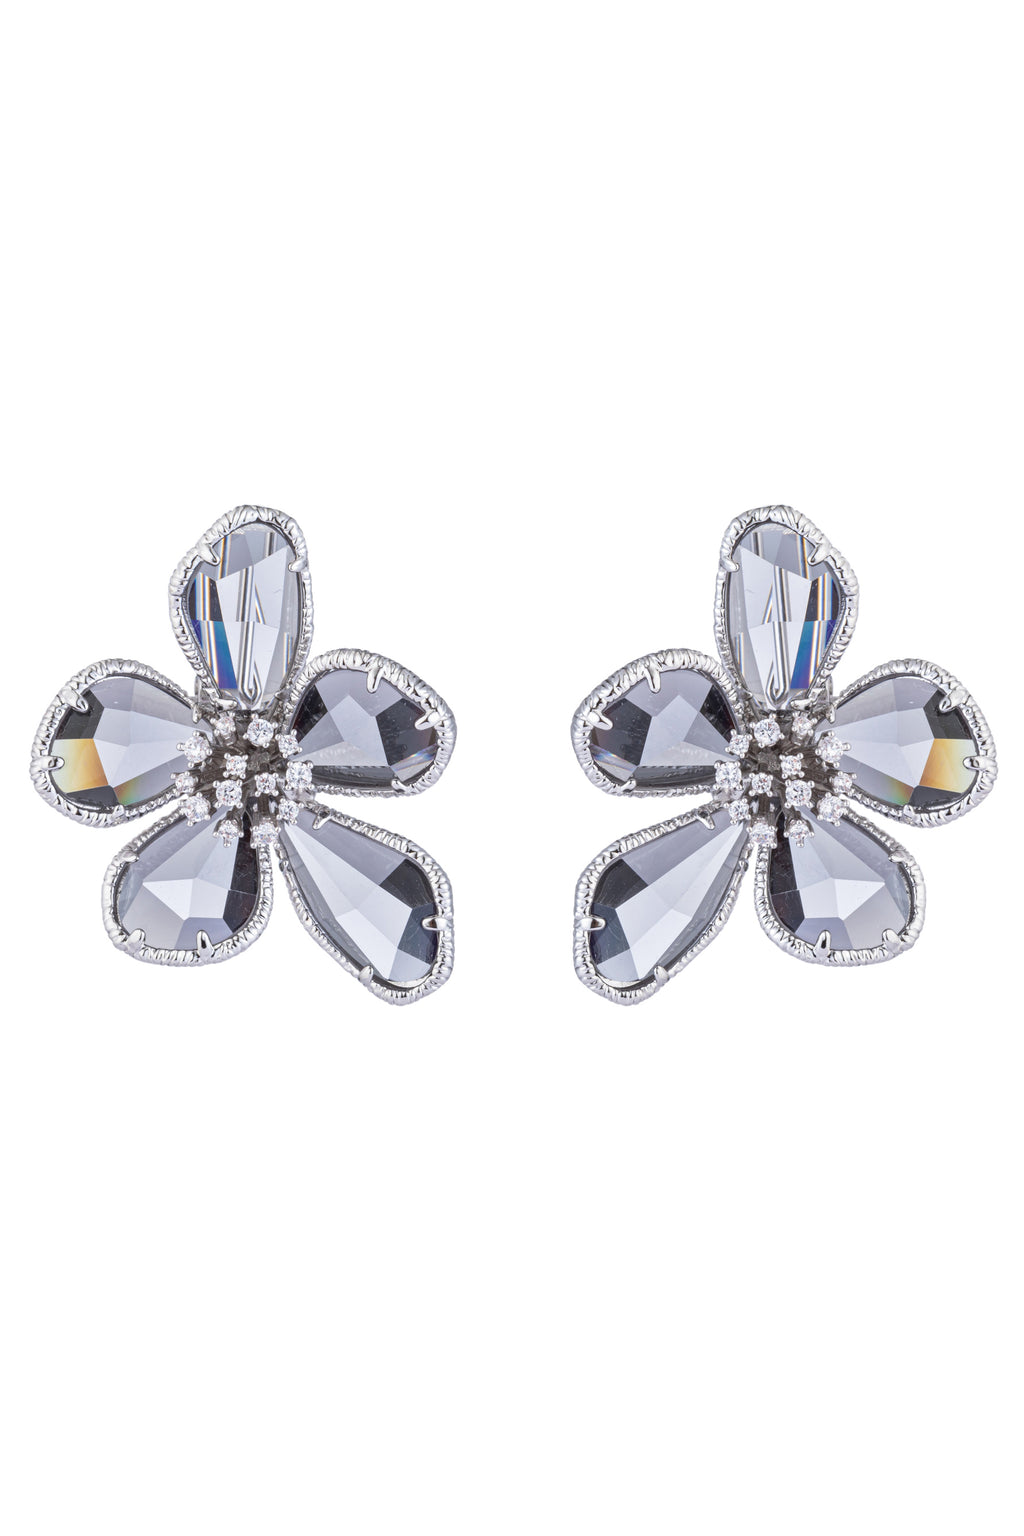 Pair of 1 inch silver flower earrings. Earrings feature 5 grey cubic zirconia petals and studded white cubic zirconia stone center.